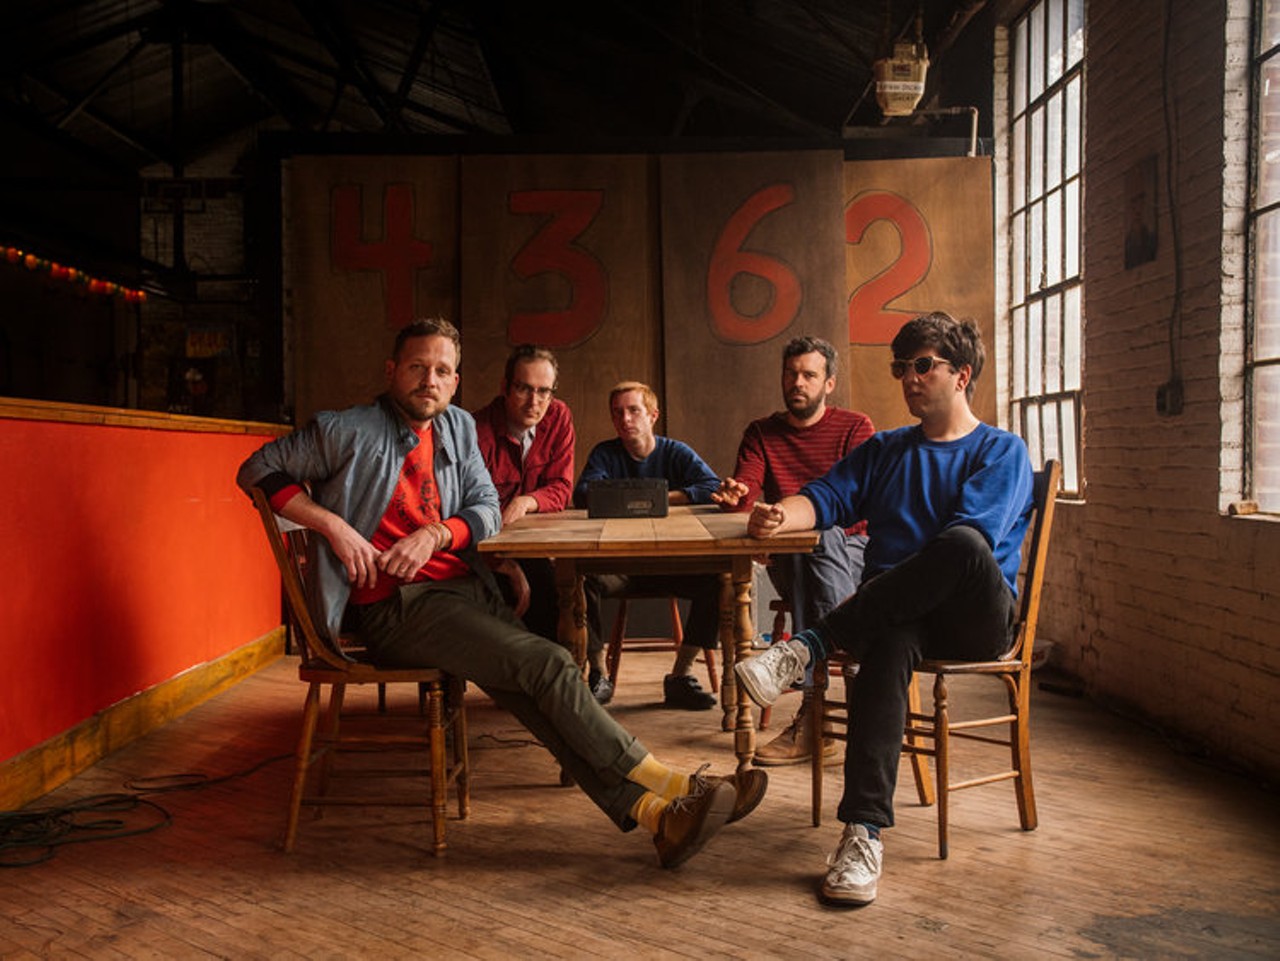 Friday, April 13 
Dr. Dog Good-time rockers Dr. Dog come bearing songs from critically lauded new album Critical Equation. (Hey!),; 9 p.m. at Plaza Live; $23-$34.50; 407-228-1220
Photo via Dr. Dog's website